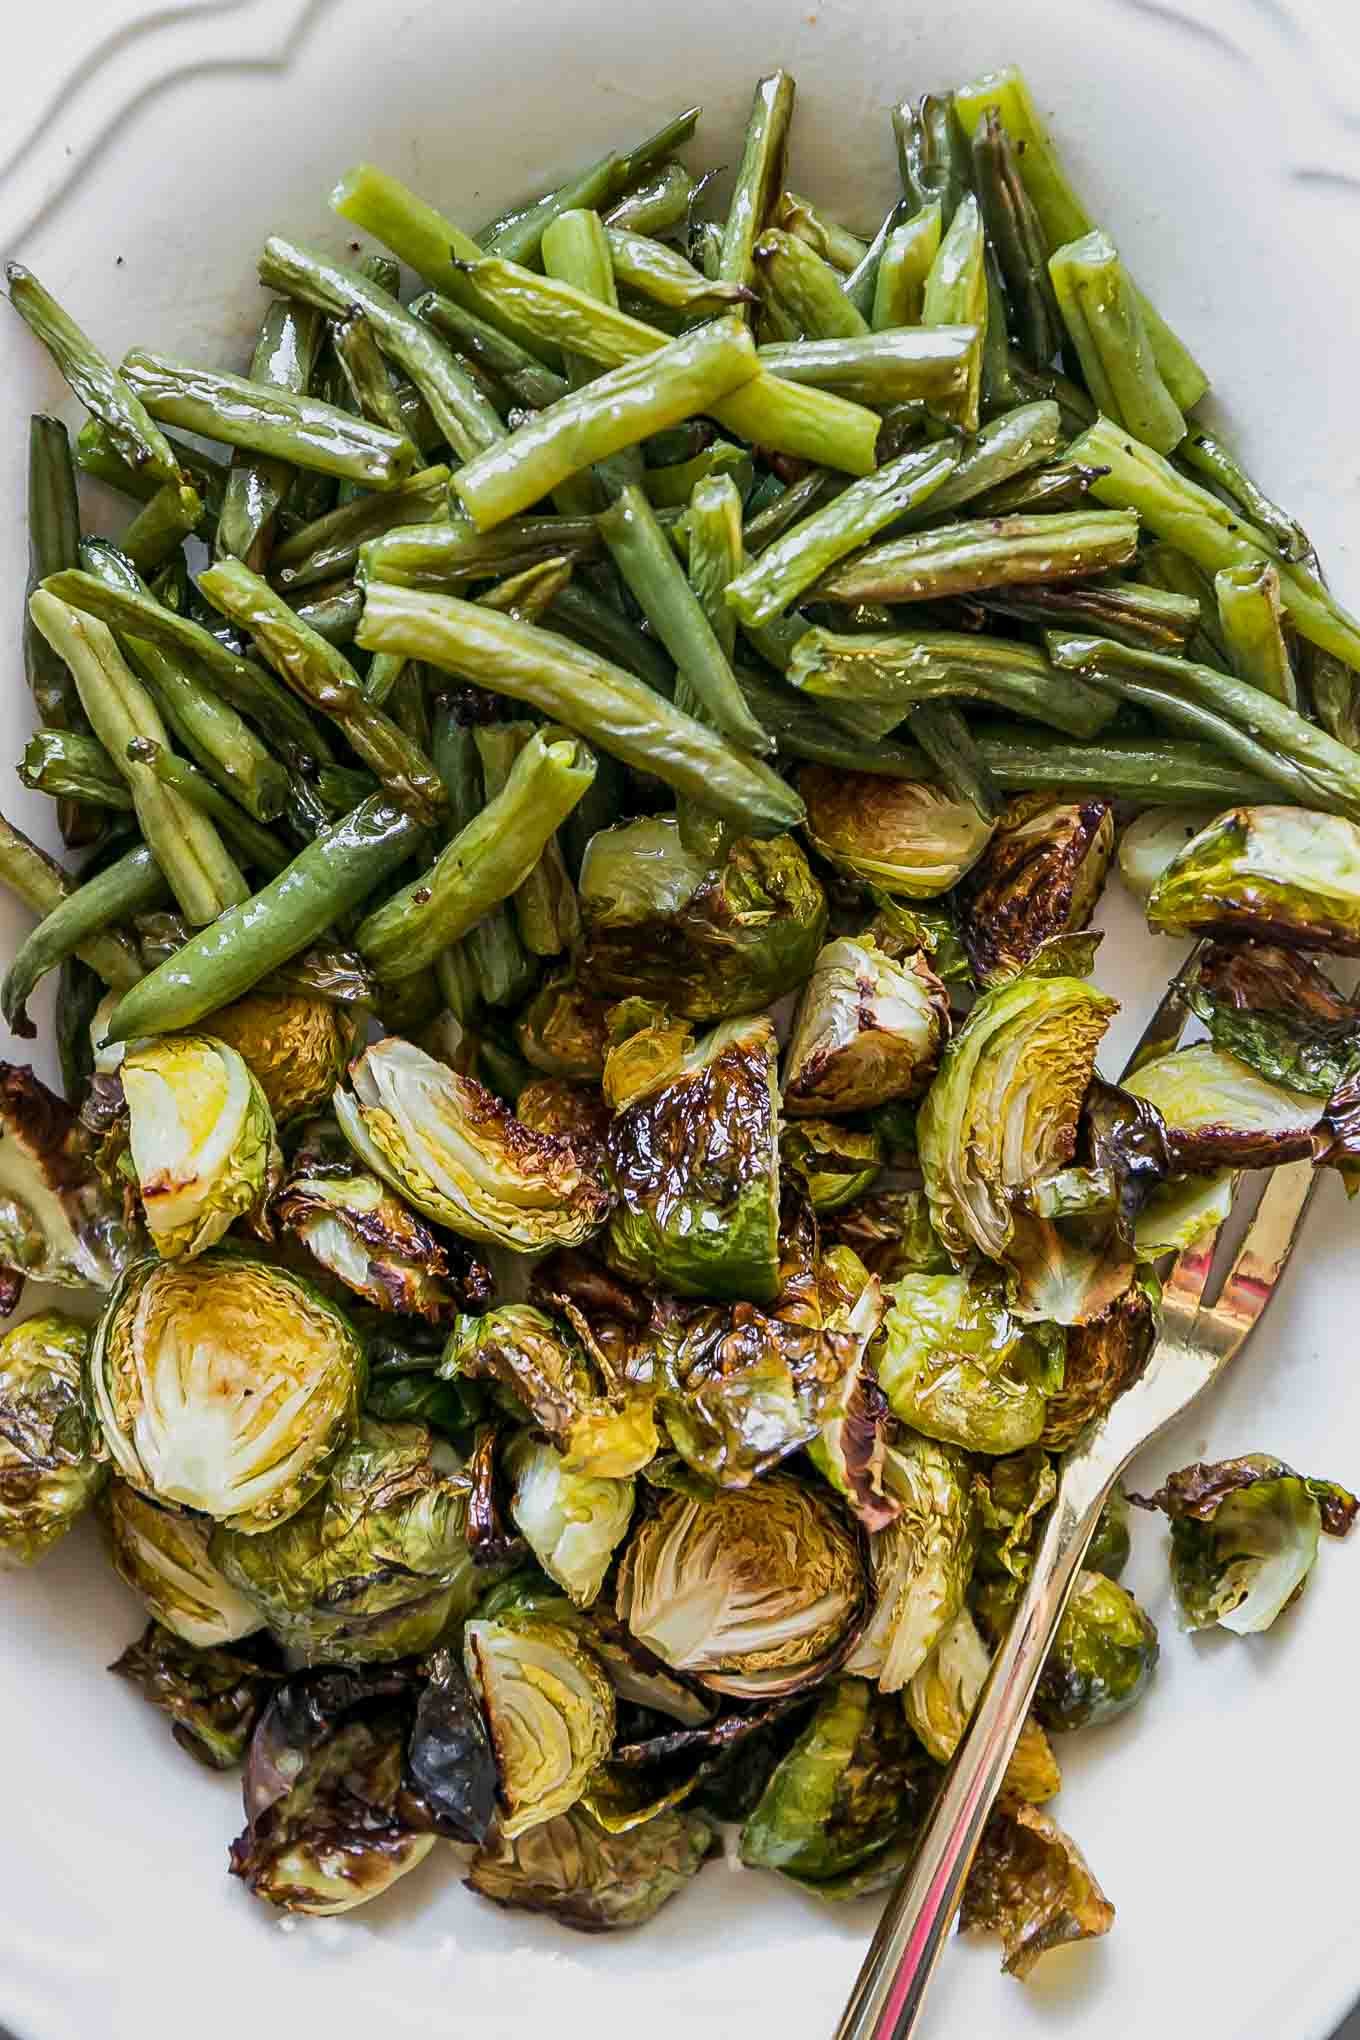 a close up photo of baked green beans and brussels sprouts on a white plate